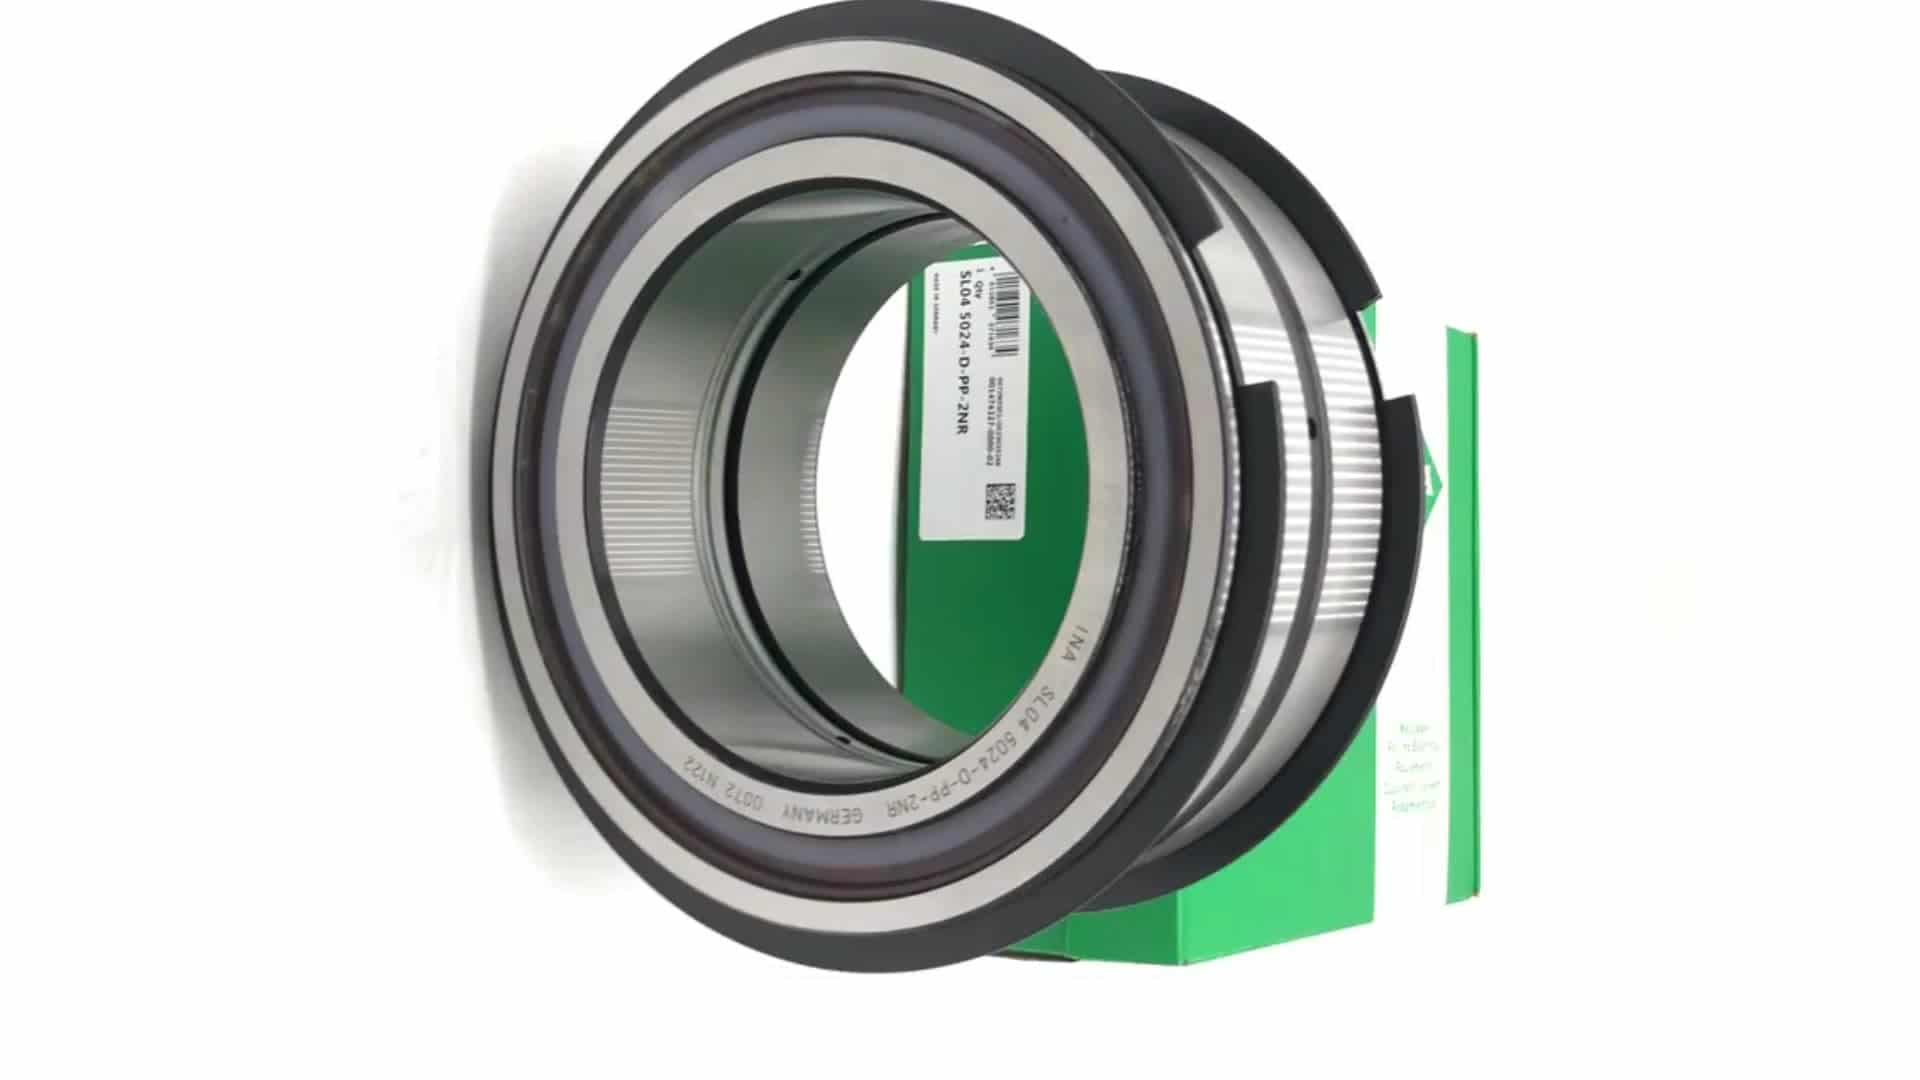 Germany Double Row SL045011 Cylindrical Roller Bearing